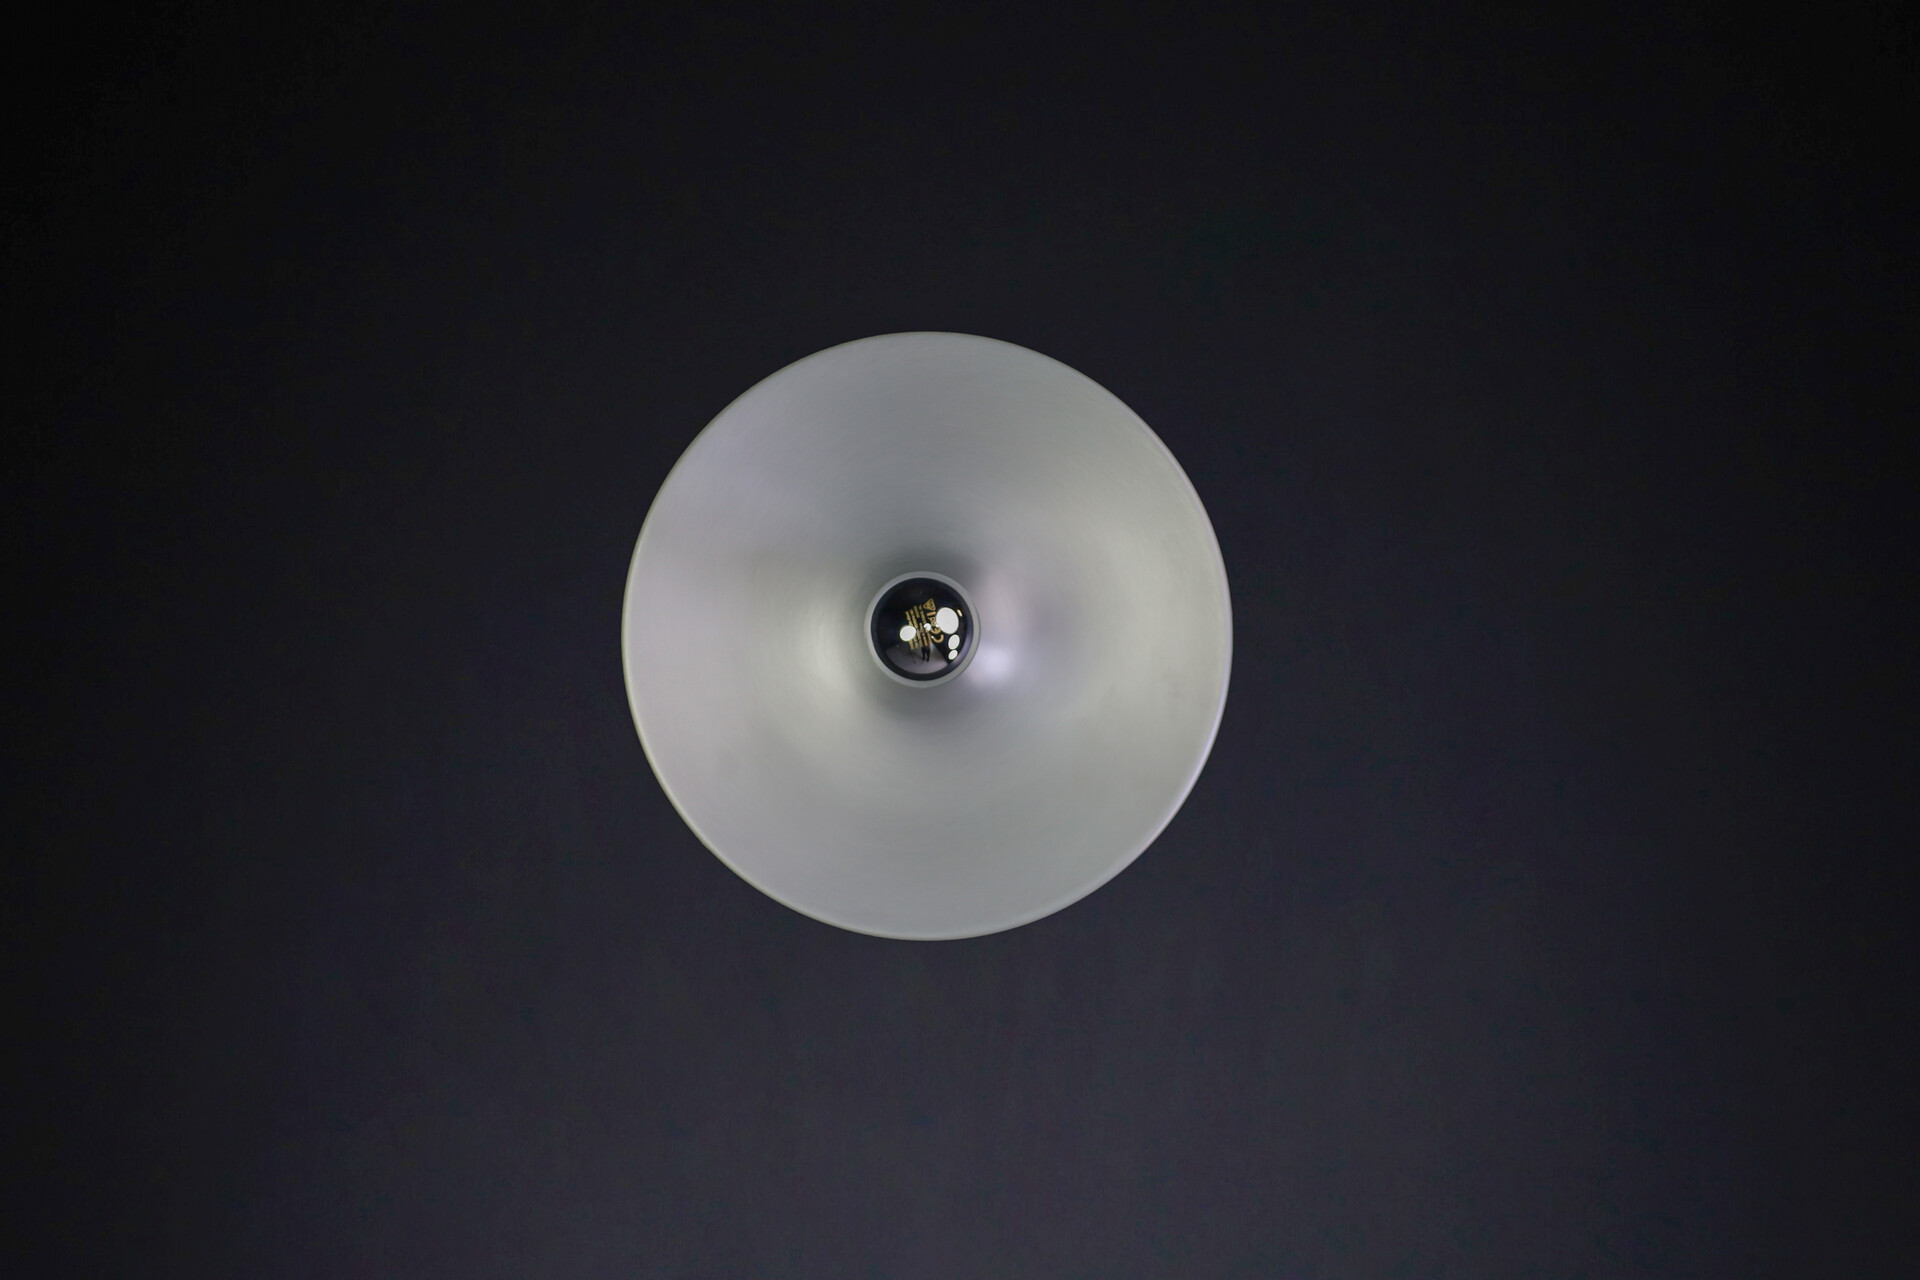 Mid century modern Charlotte Perriand Aluminum Disc Wall Lights, Germany 1960s Mid-20th century